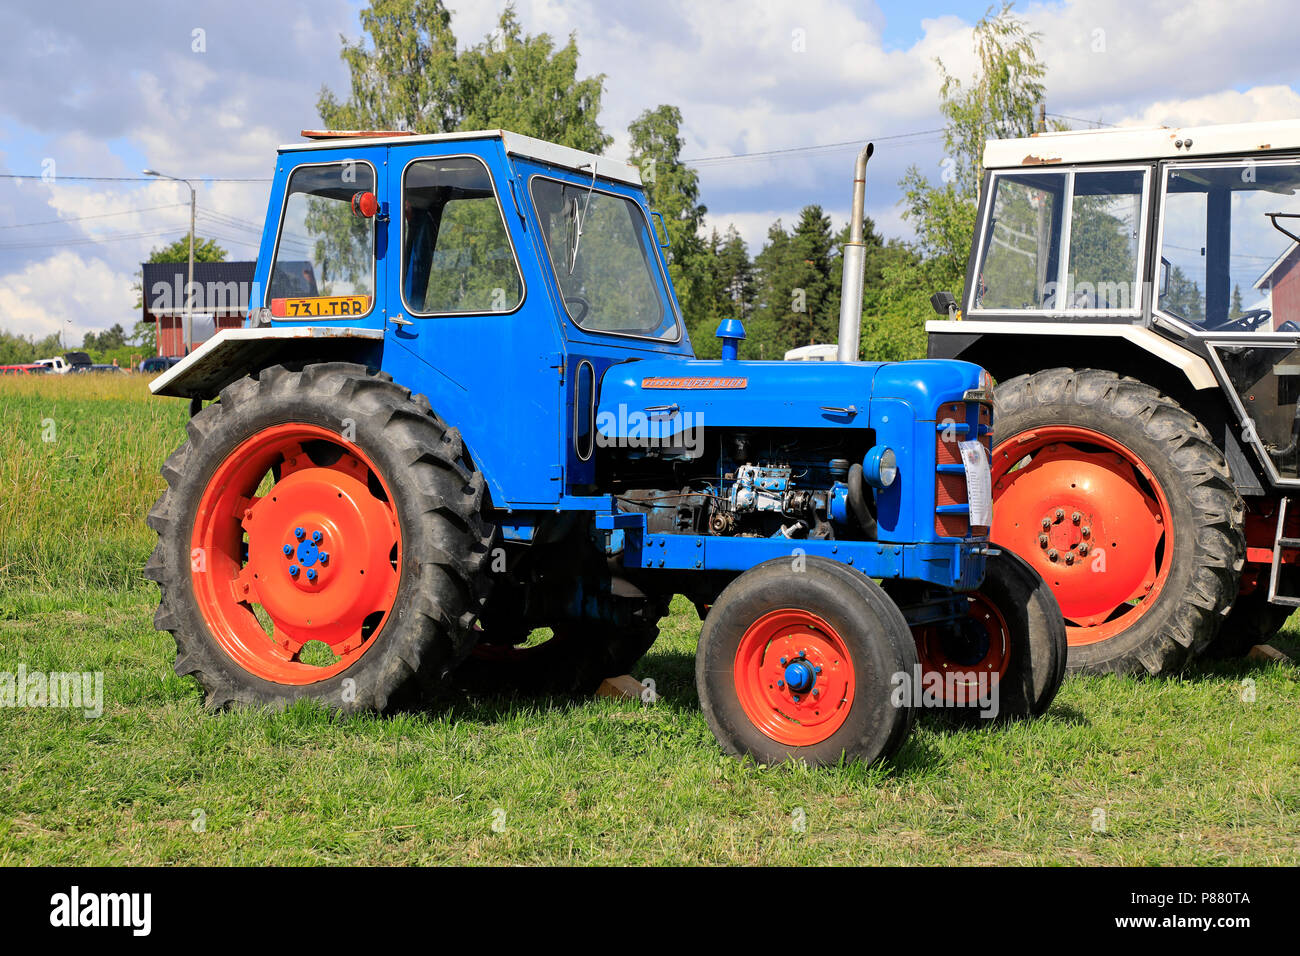 Colorful, classic Fordson Super Major tractor with cab on display on Kimito Traktorkavalkad, Tractor Cavalcade. Kimito, Finland - July 7, 2018. Stock Photo